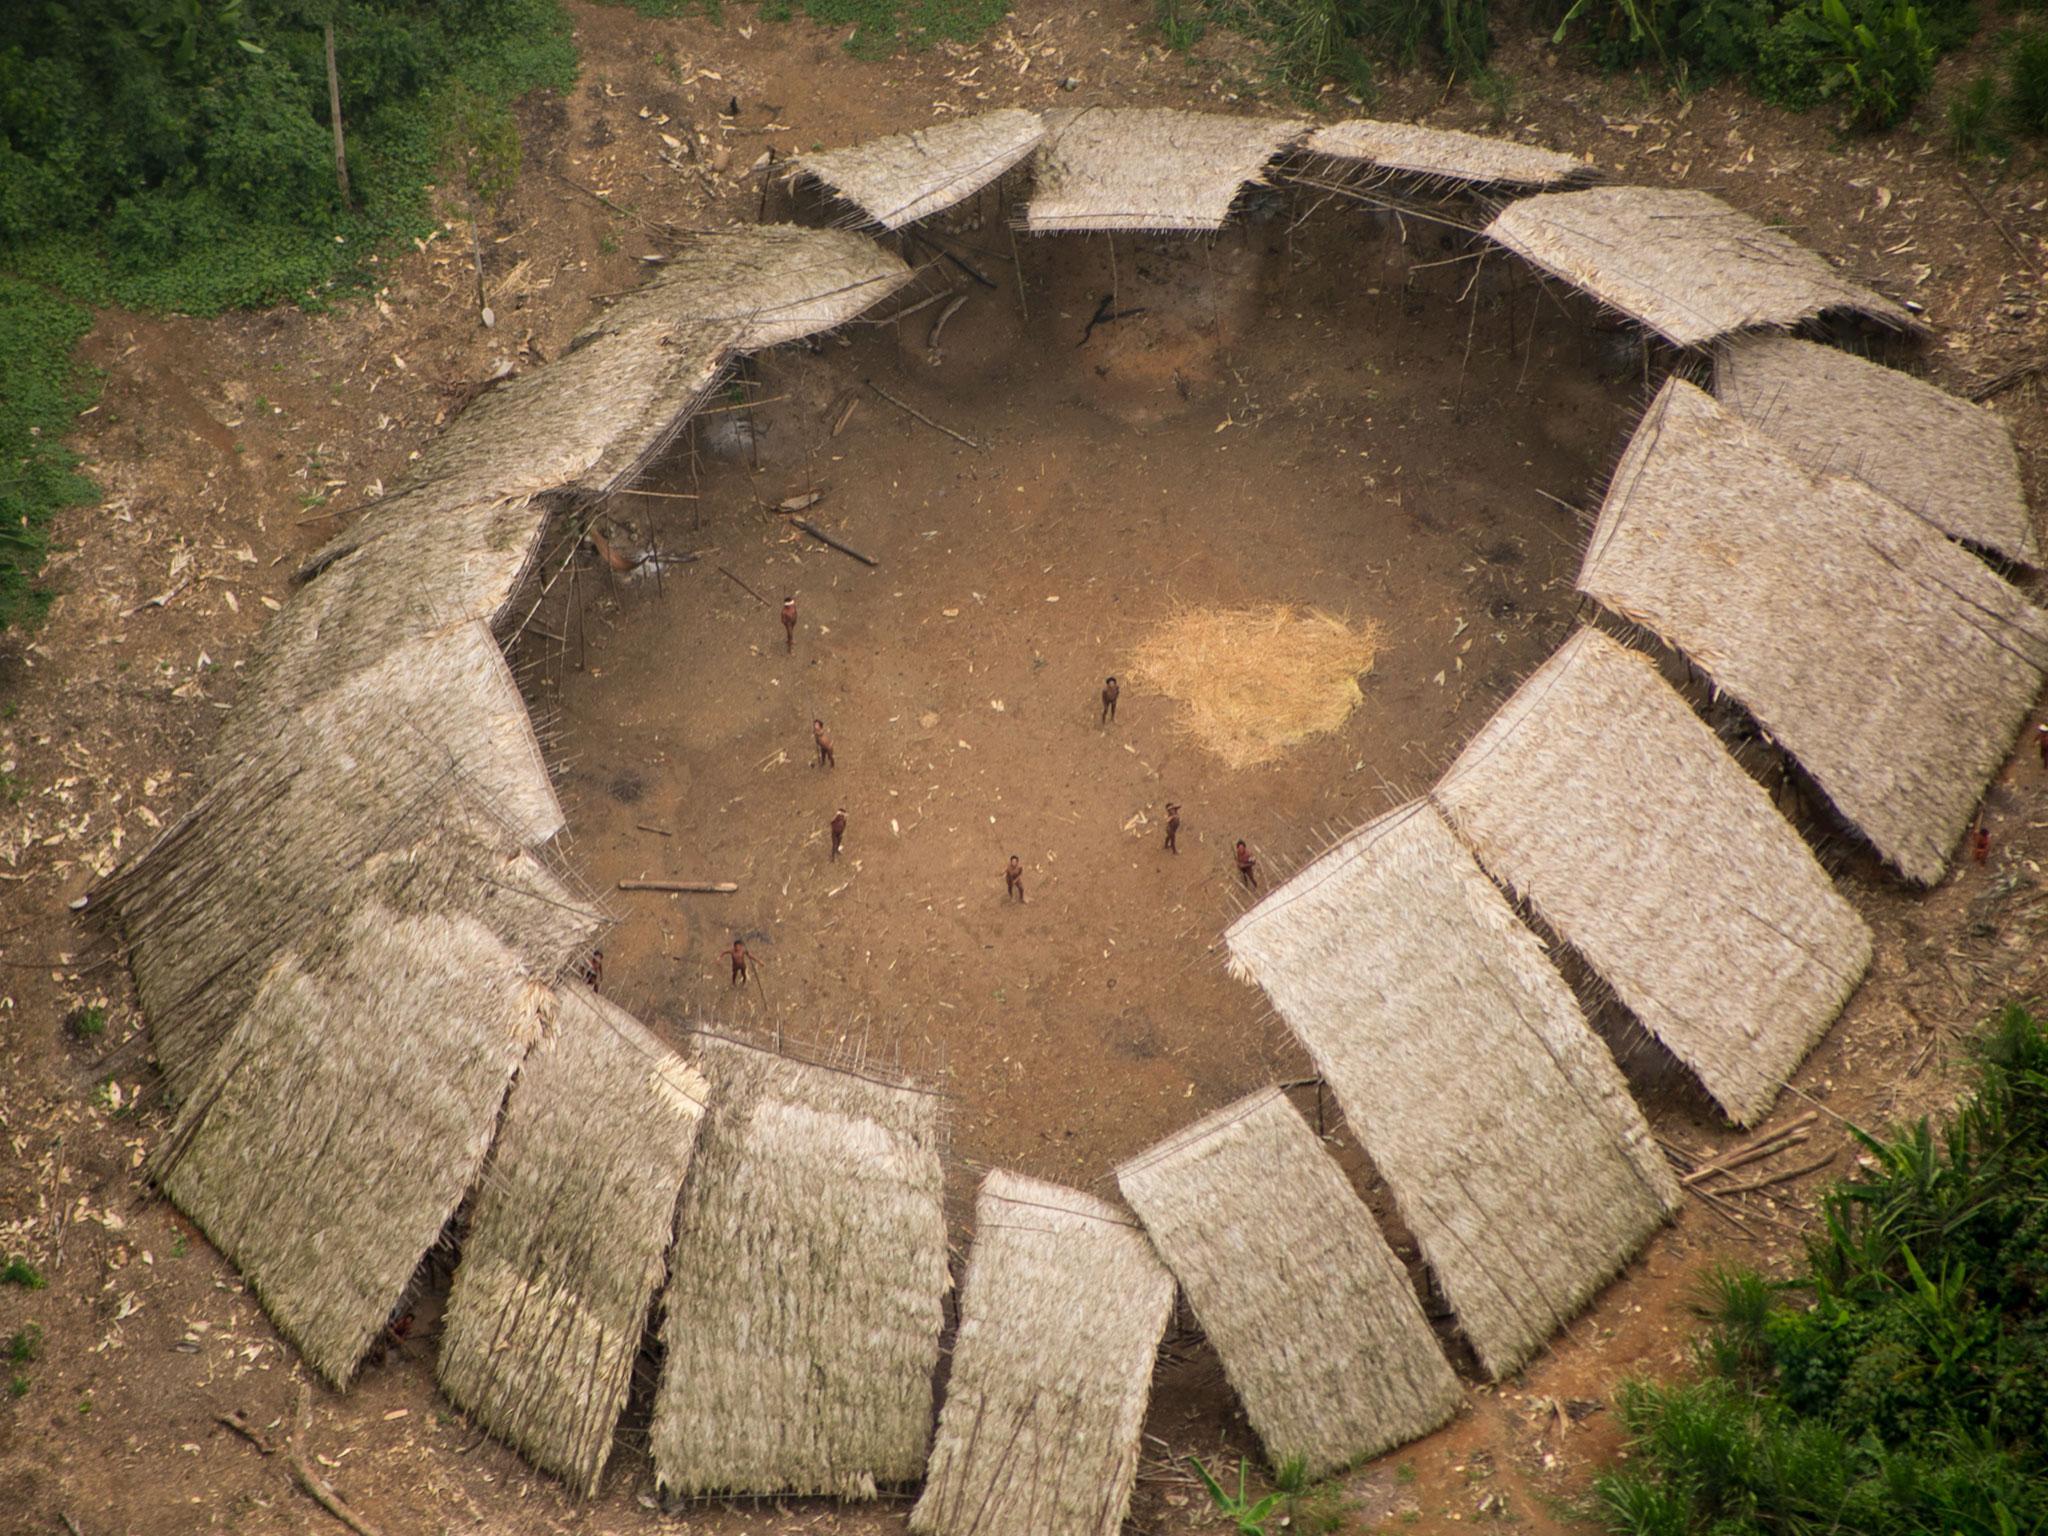 Families of the tribe live together in the same ‘yano’ structure